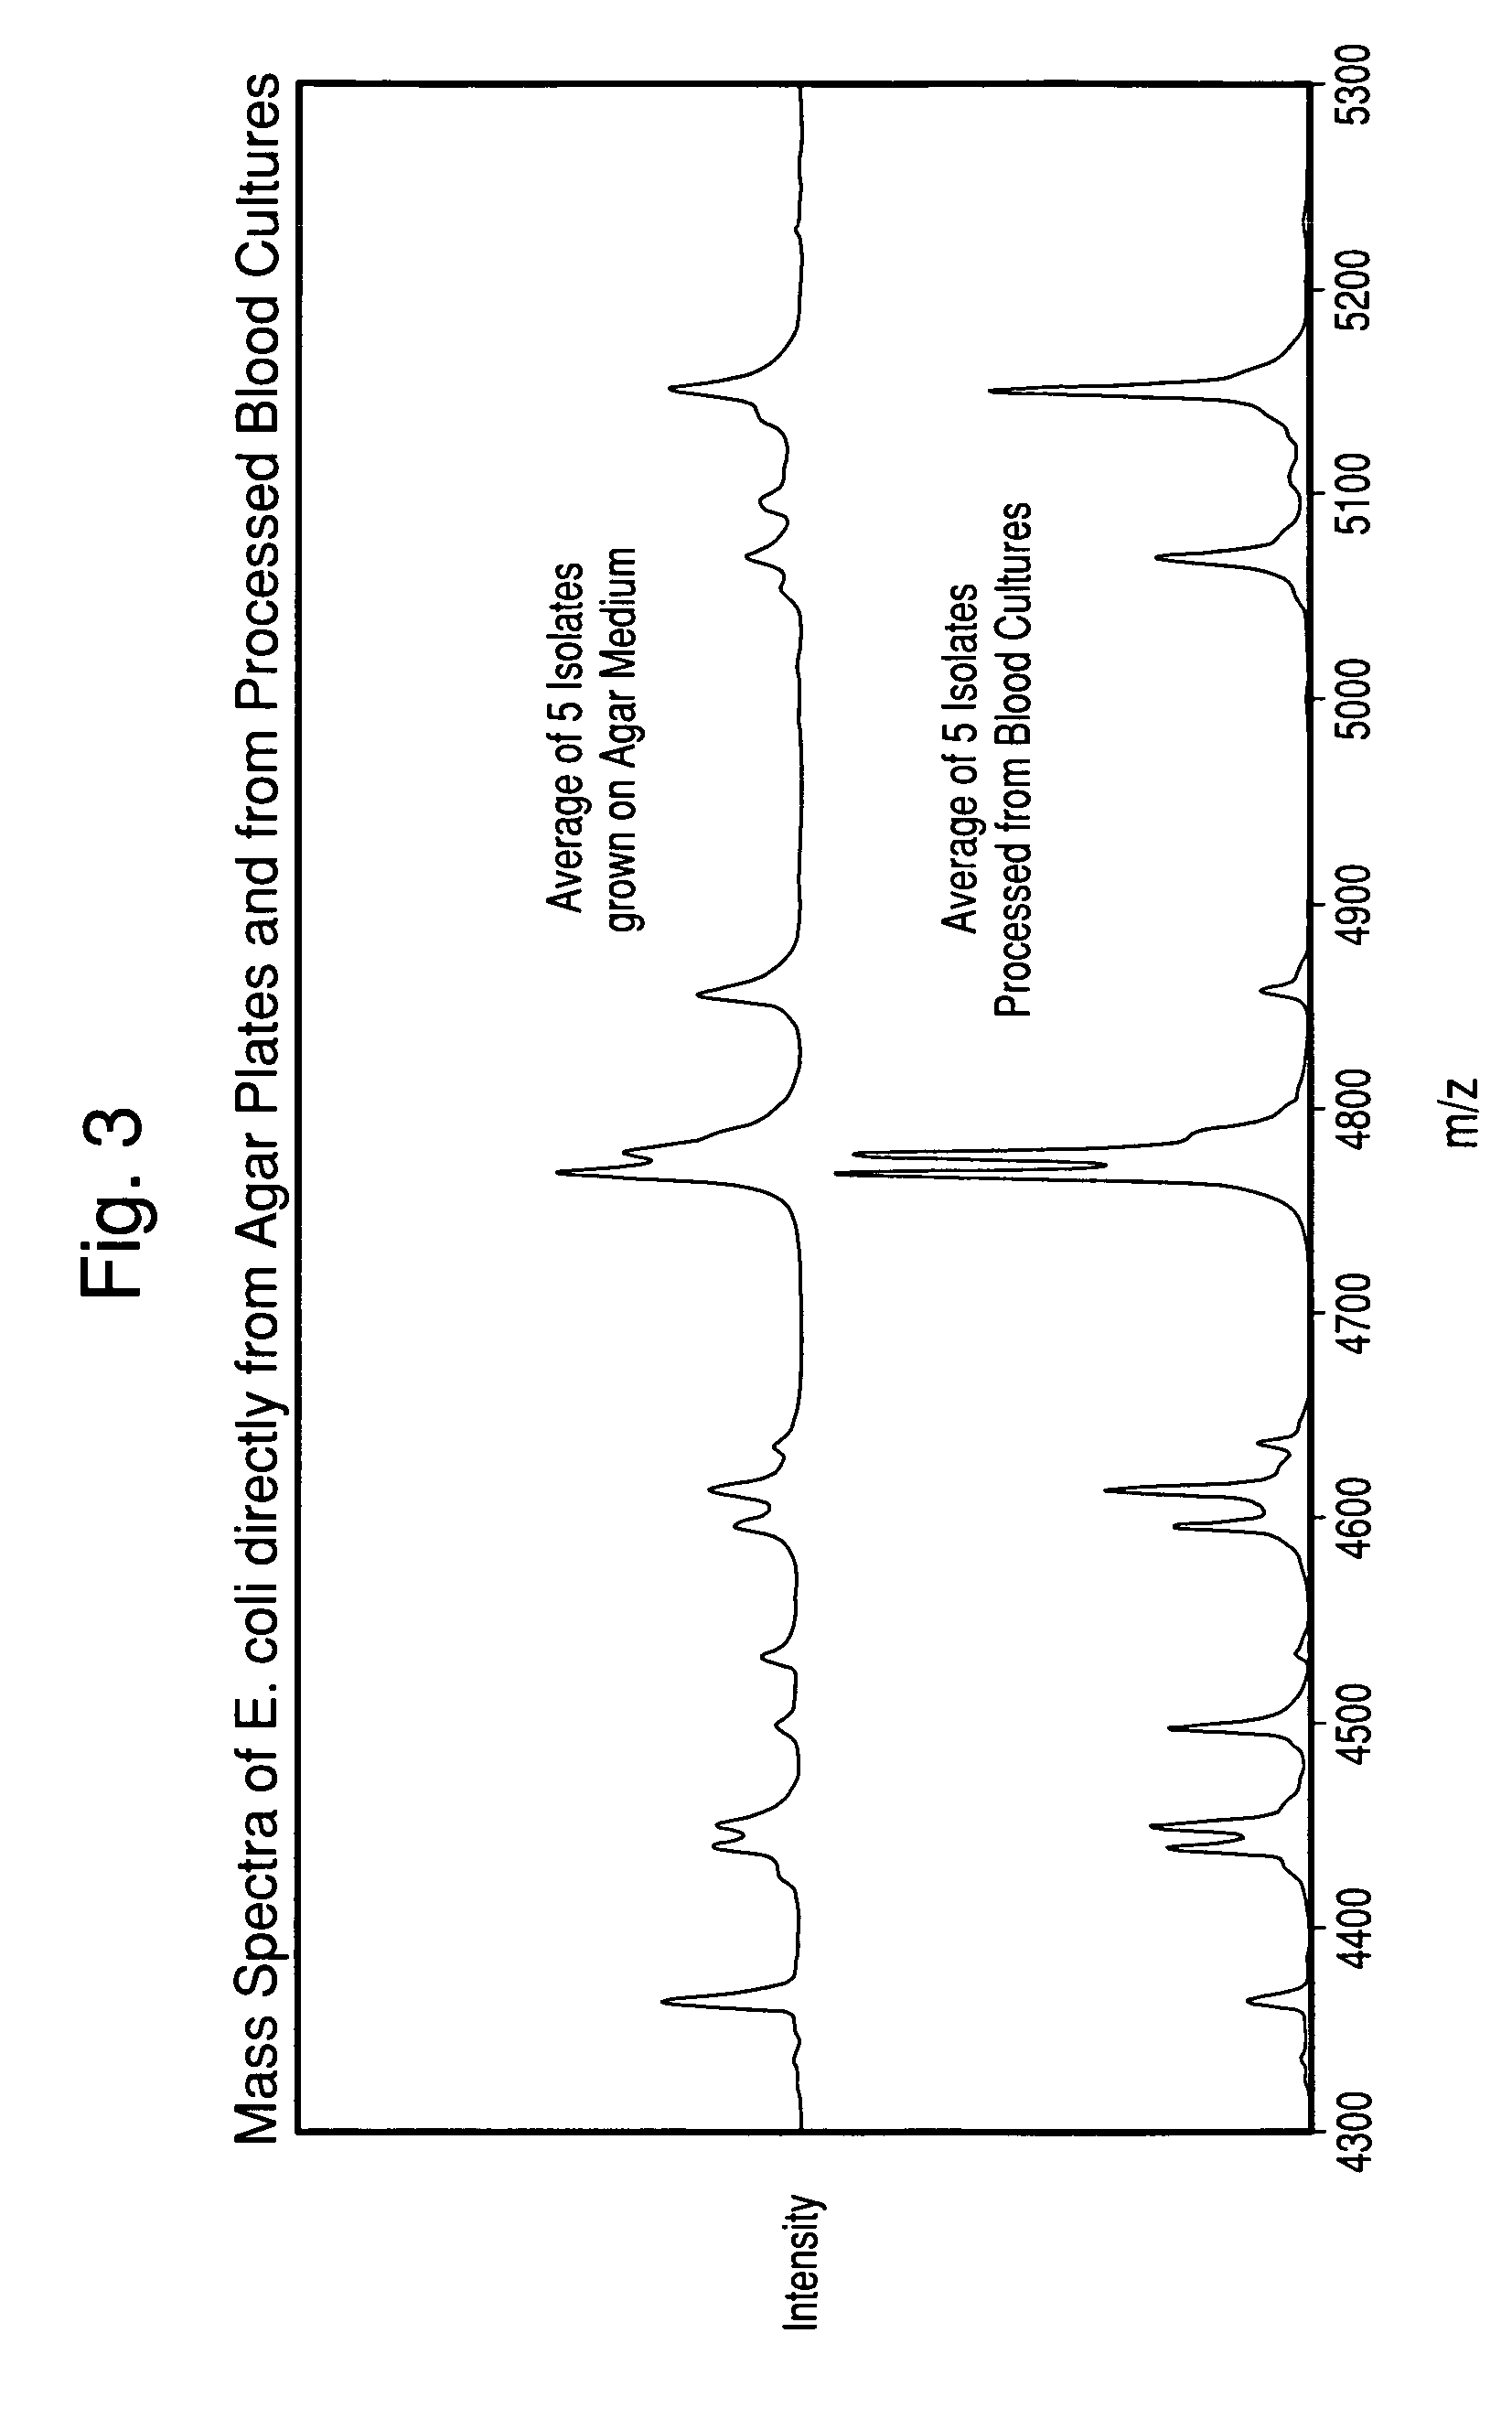 Method for separation, characterization and/or identification of microorganisms using mass spectrometry